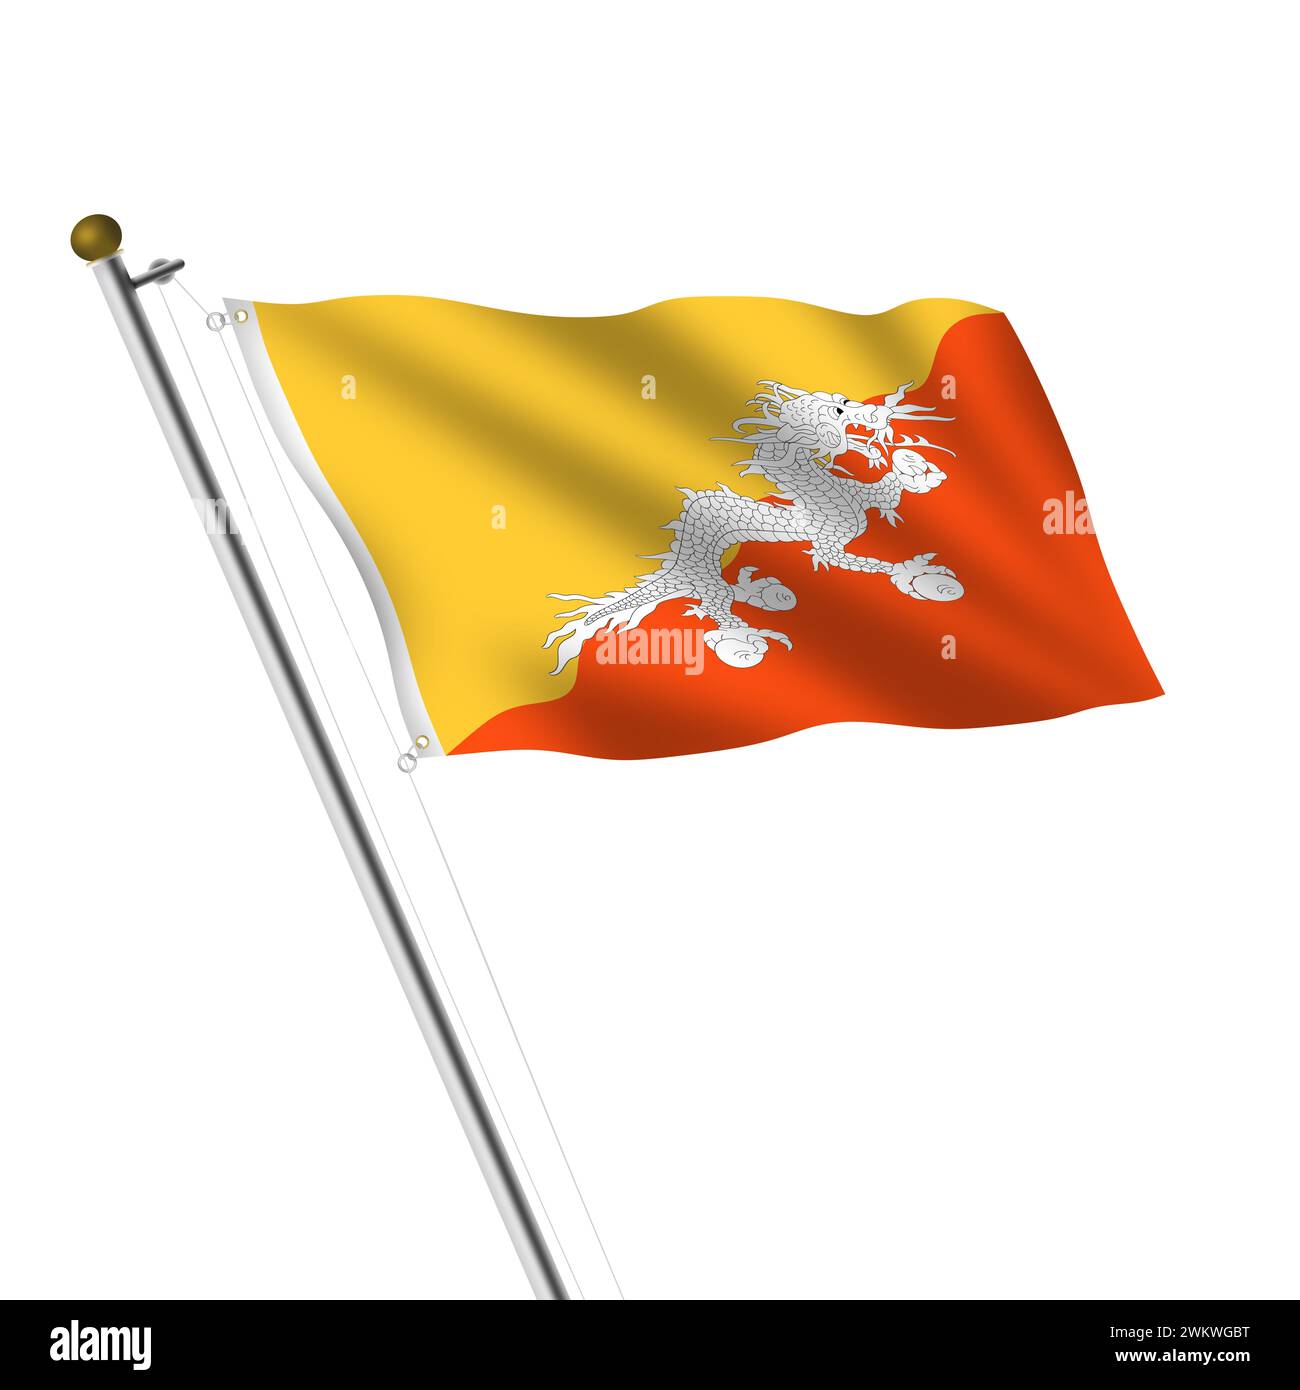 Bhutan Flagpole 3d illustration with clipping path Stock Photo